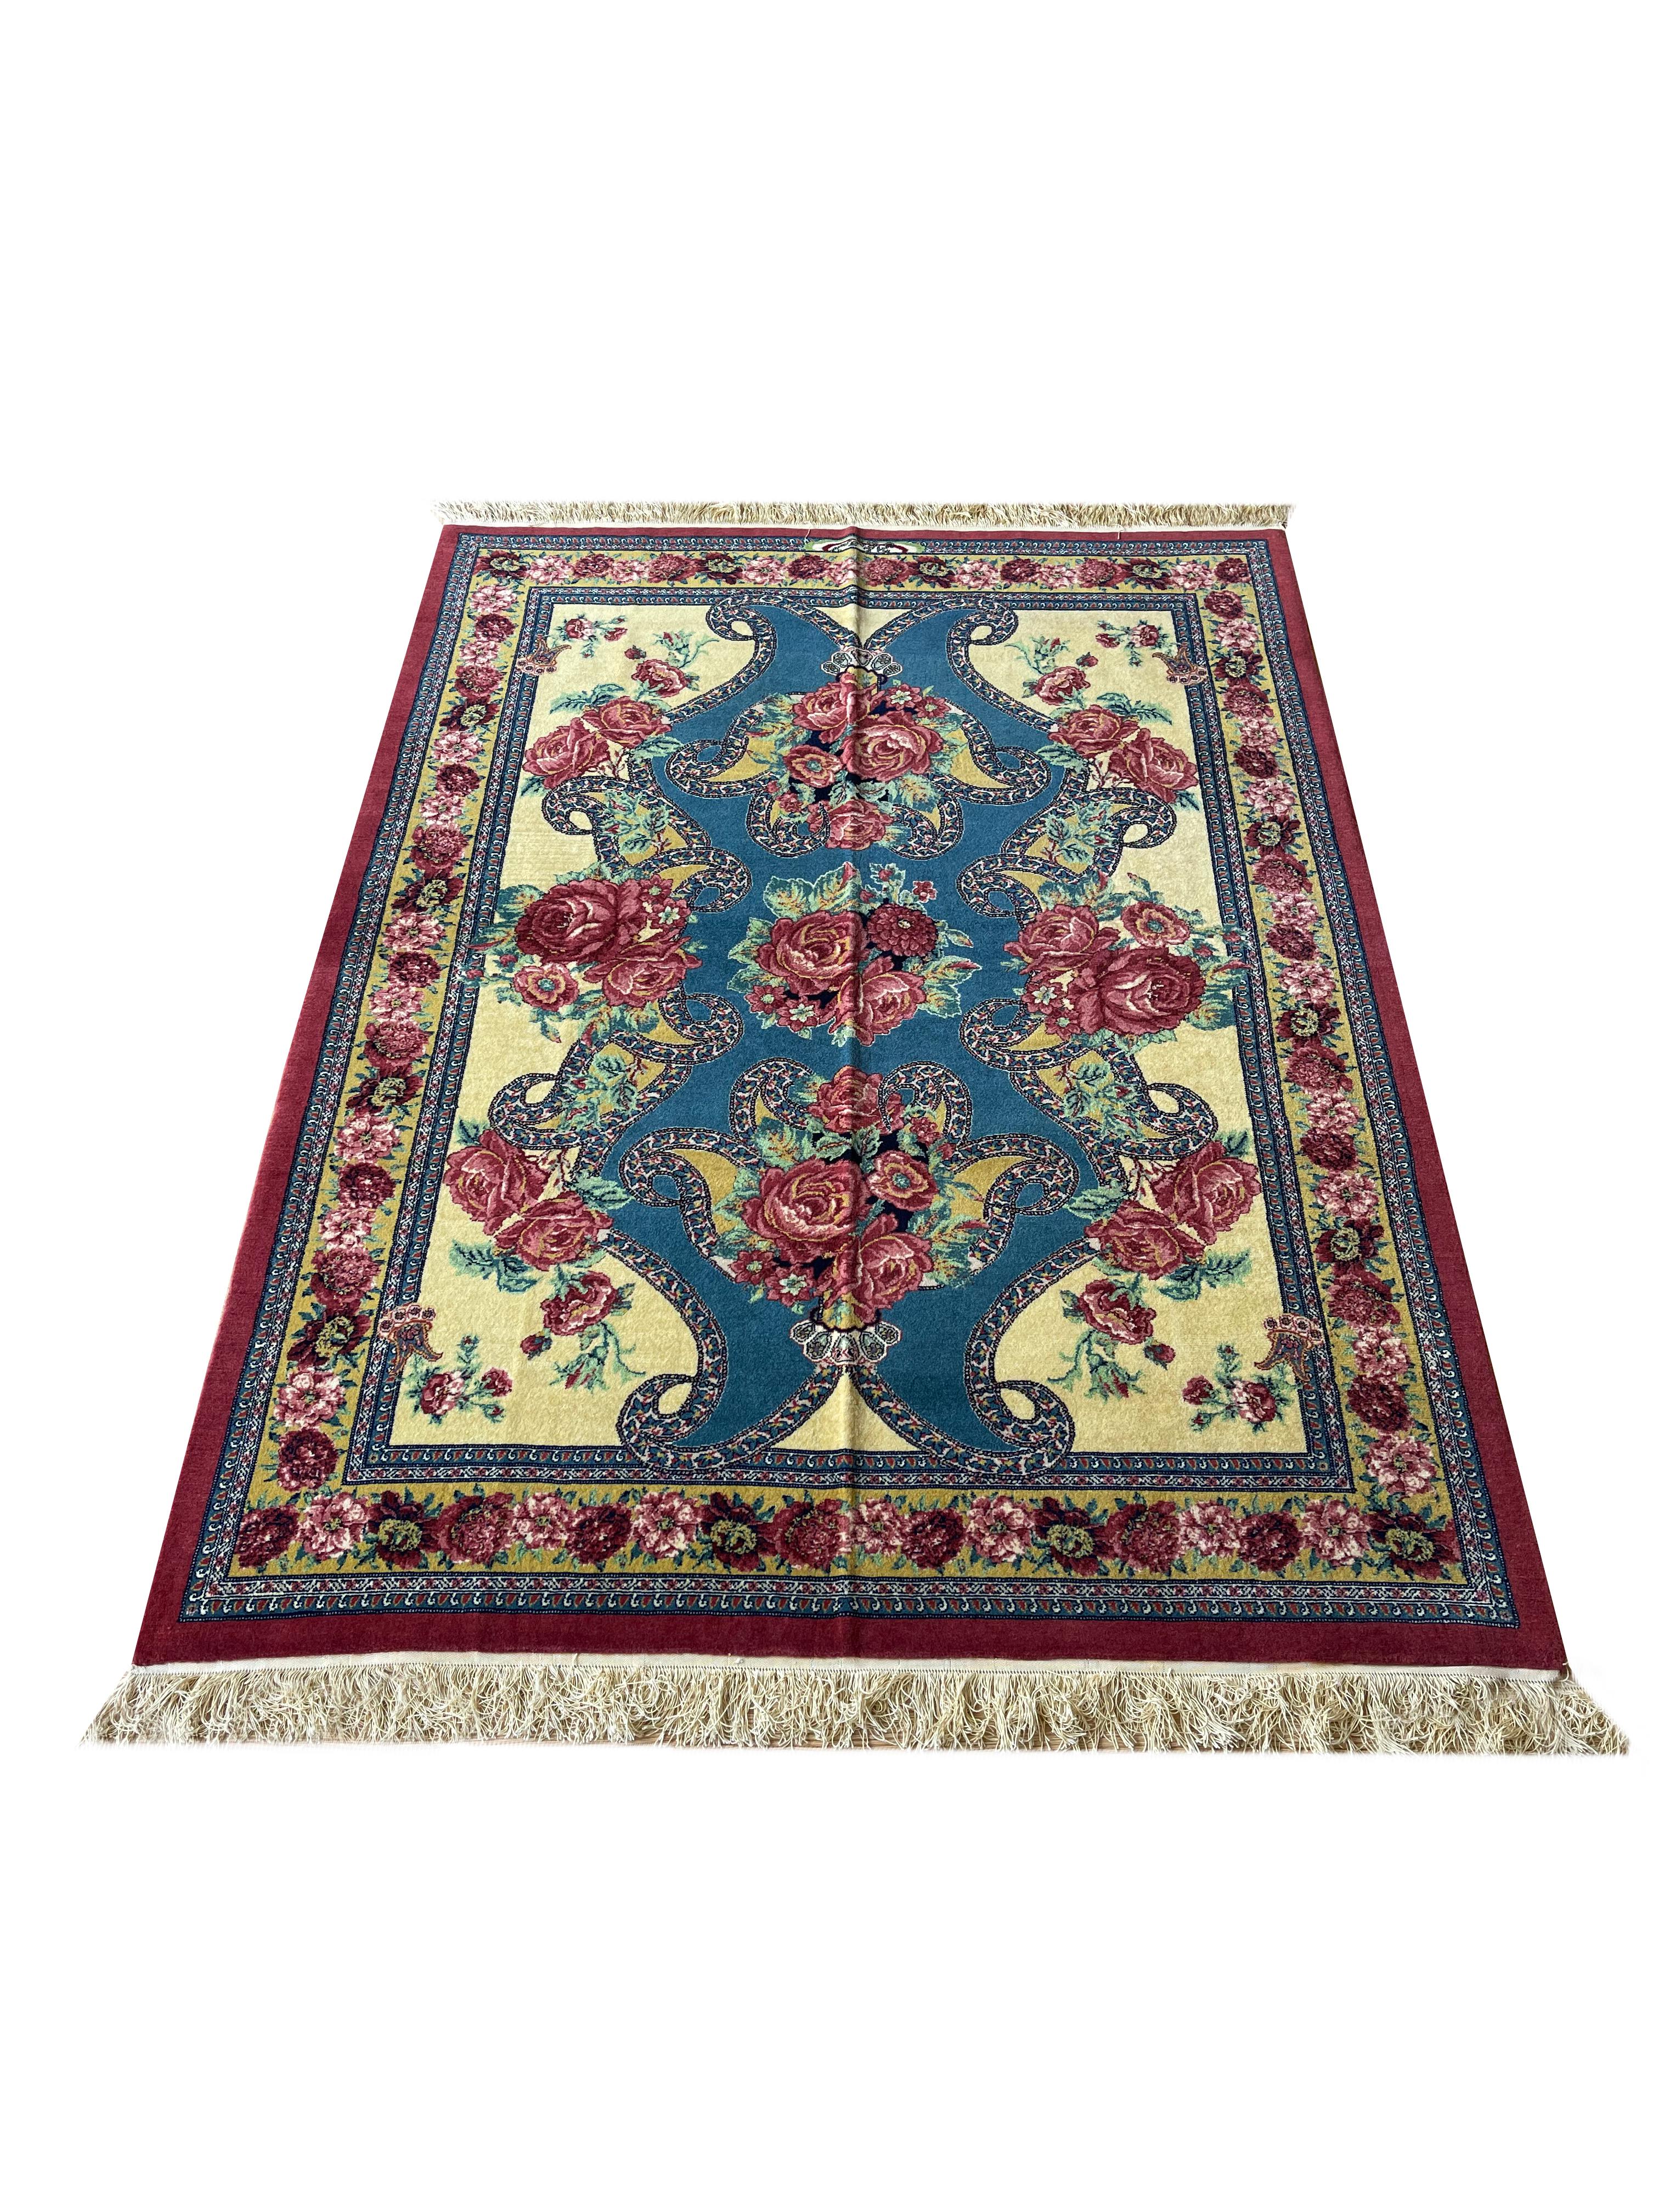 Exclusive handmade rug made of high-quality materials and designed from a very high-end rug workshop.
The background of this floral rug shows this blue rug as very vivid and shiny. 
The design of this rug includes naturally patterned roses in the